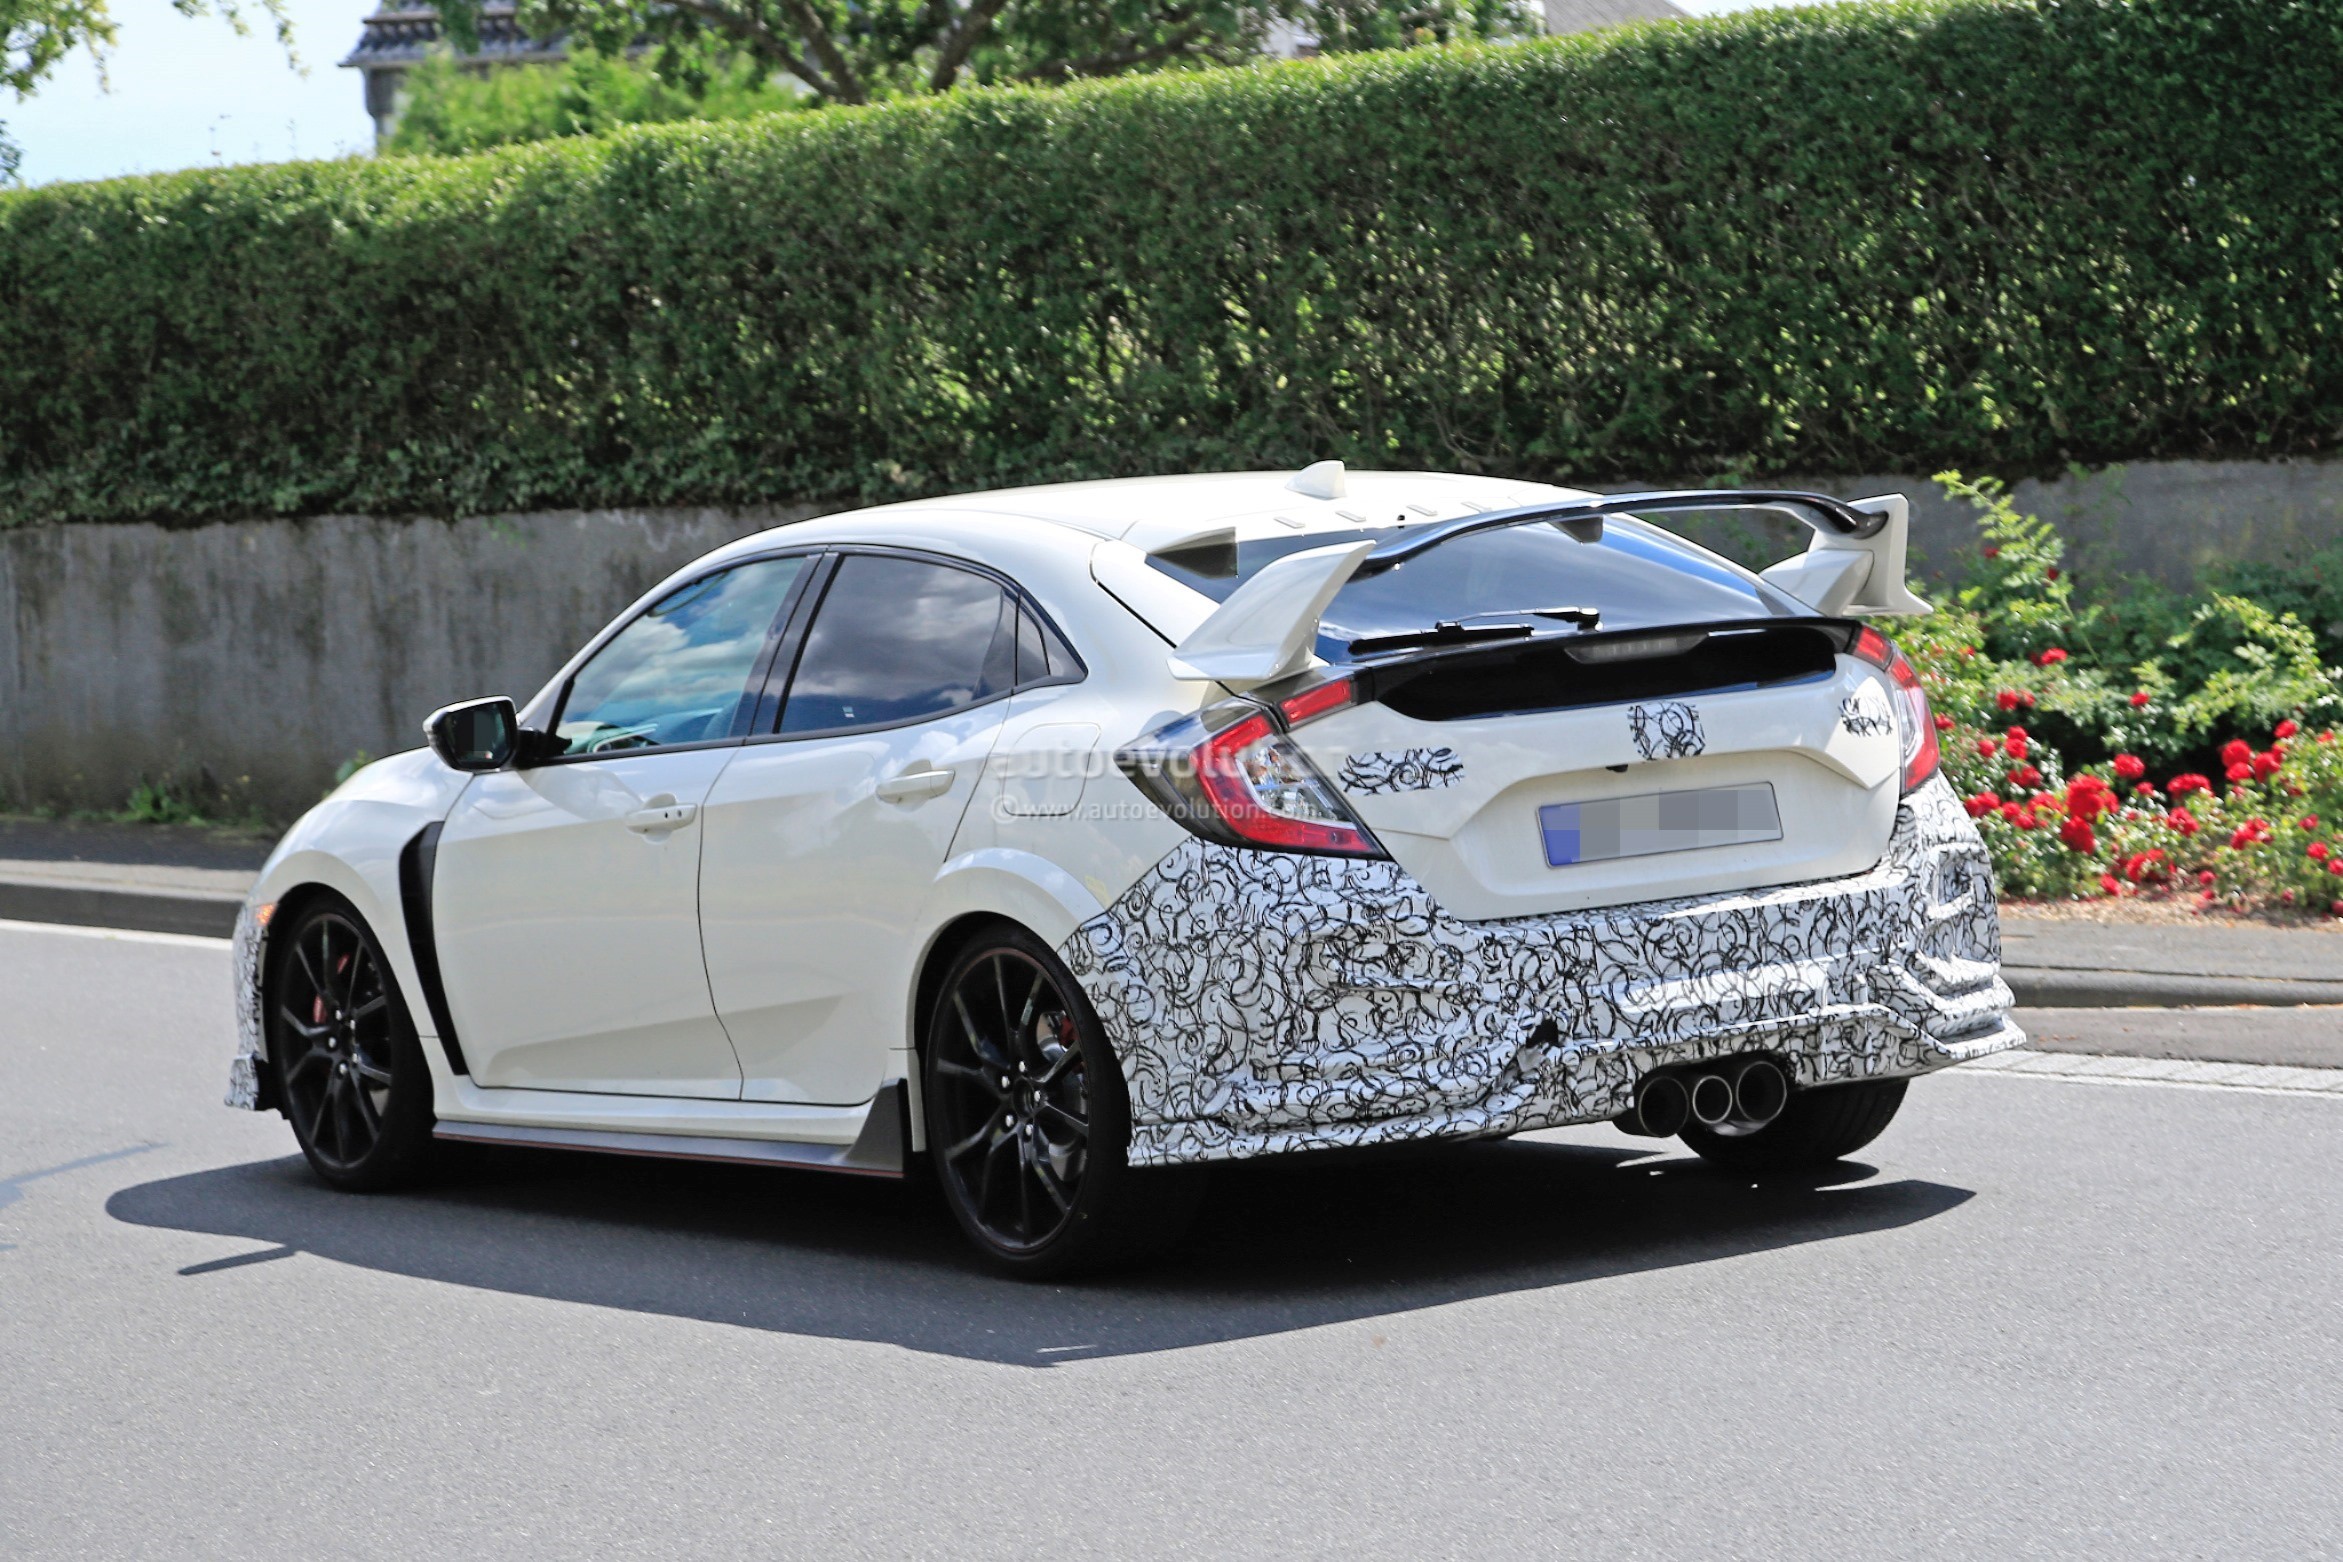 2019 Honda Civic Type R Spied For the First Time - autoevolution2343 x 1562